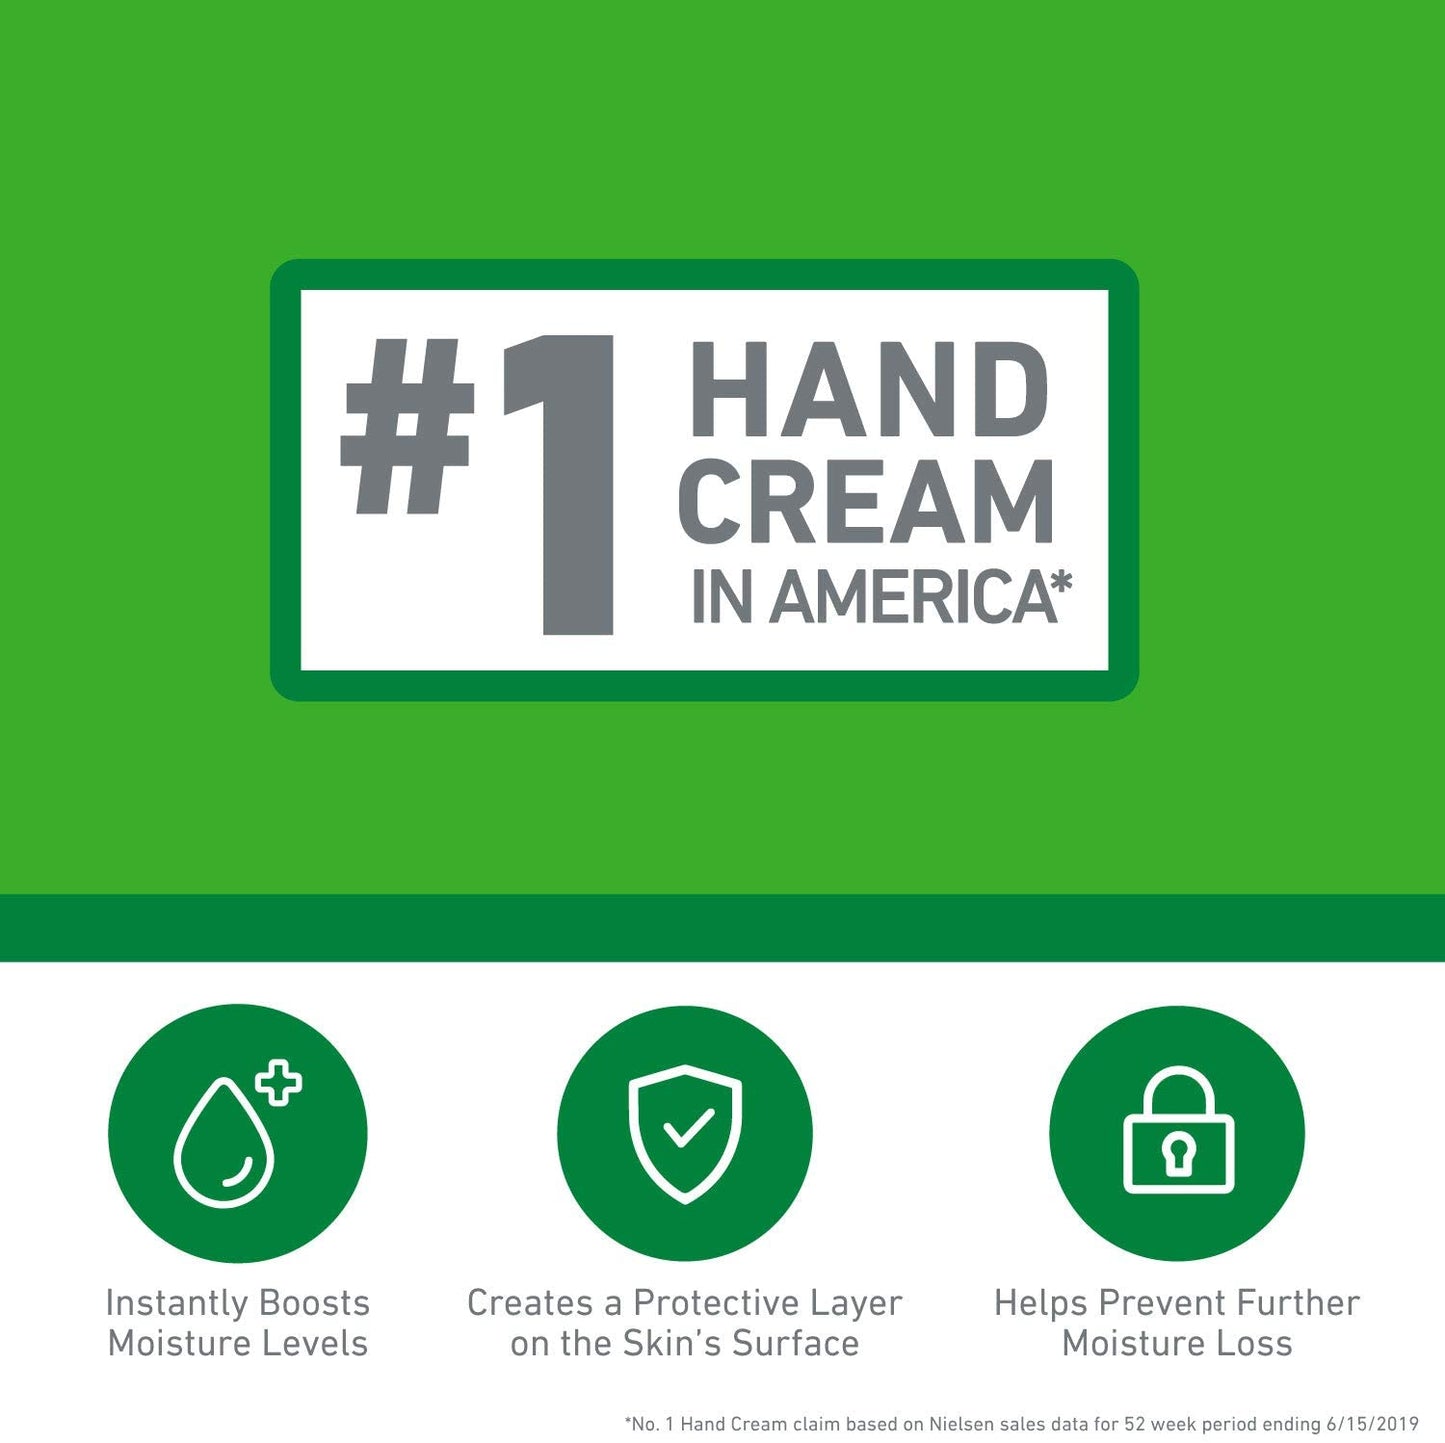 O'Keeffe's Working Hands Hand Cream for Extremely Dry, Cracked Hands, 2.7 oz. / 76g